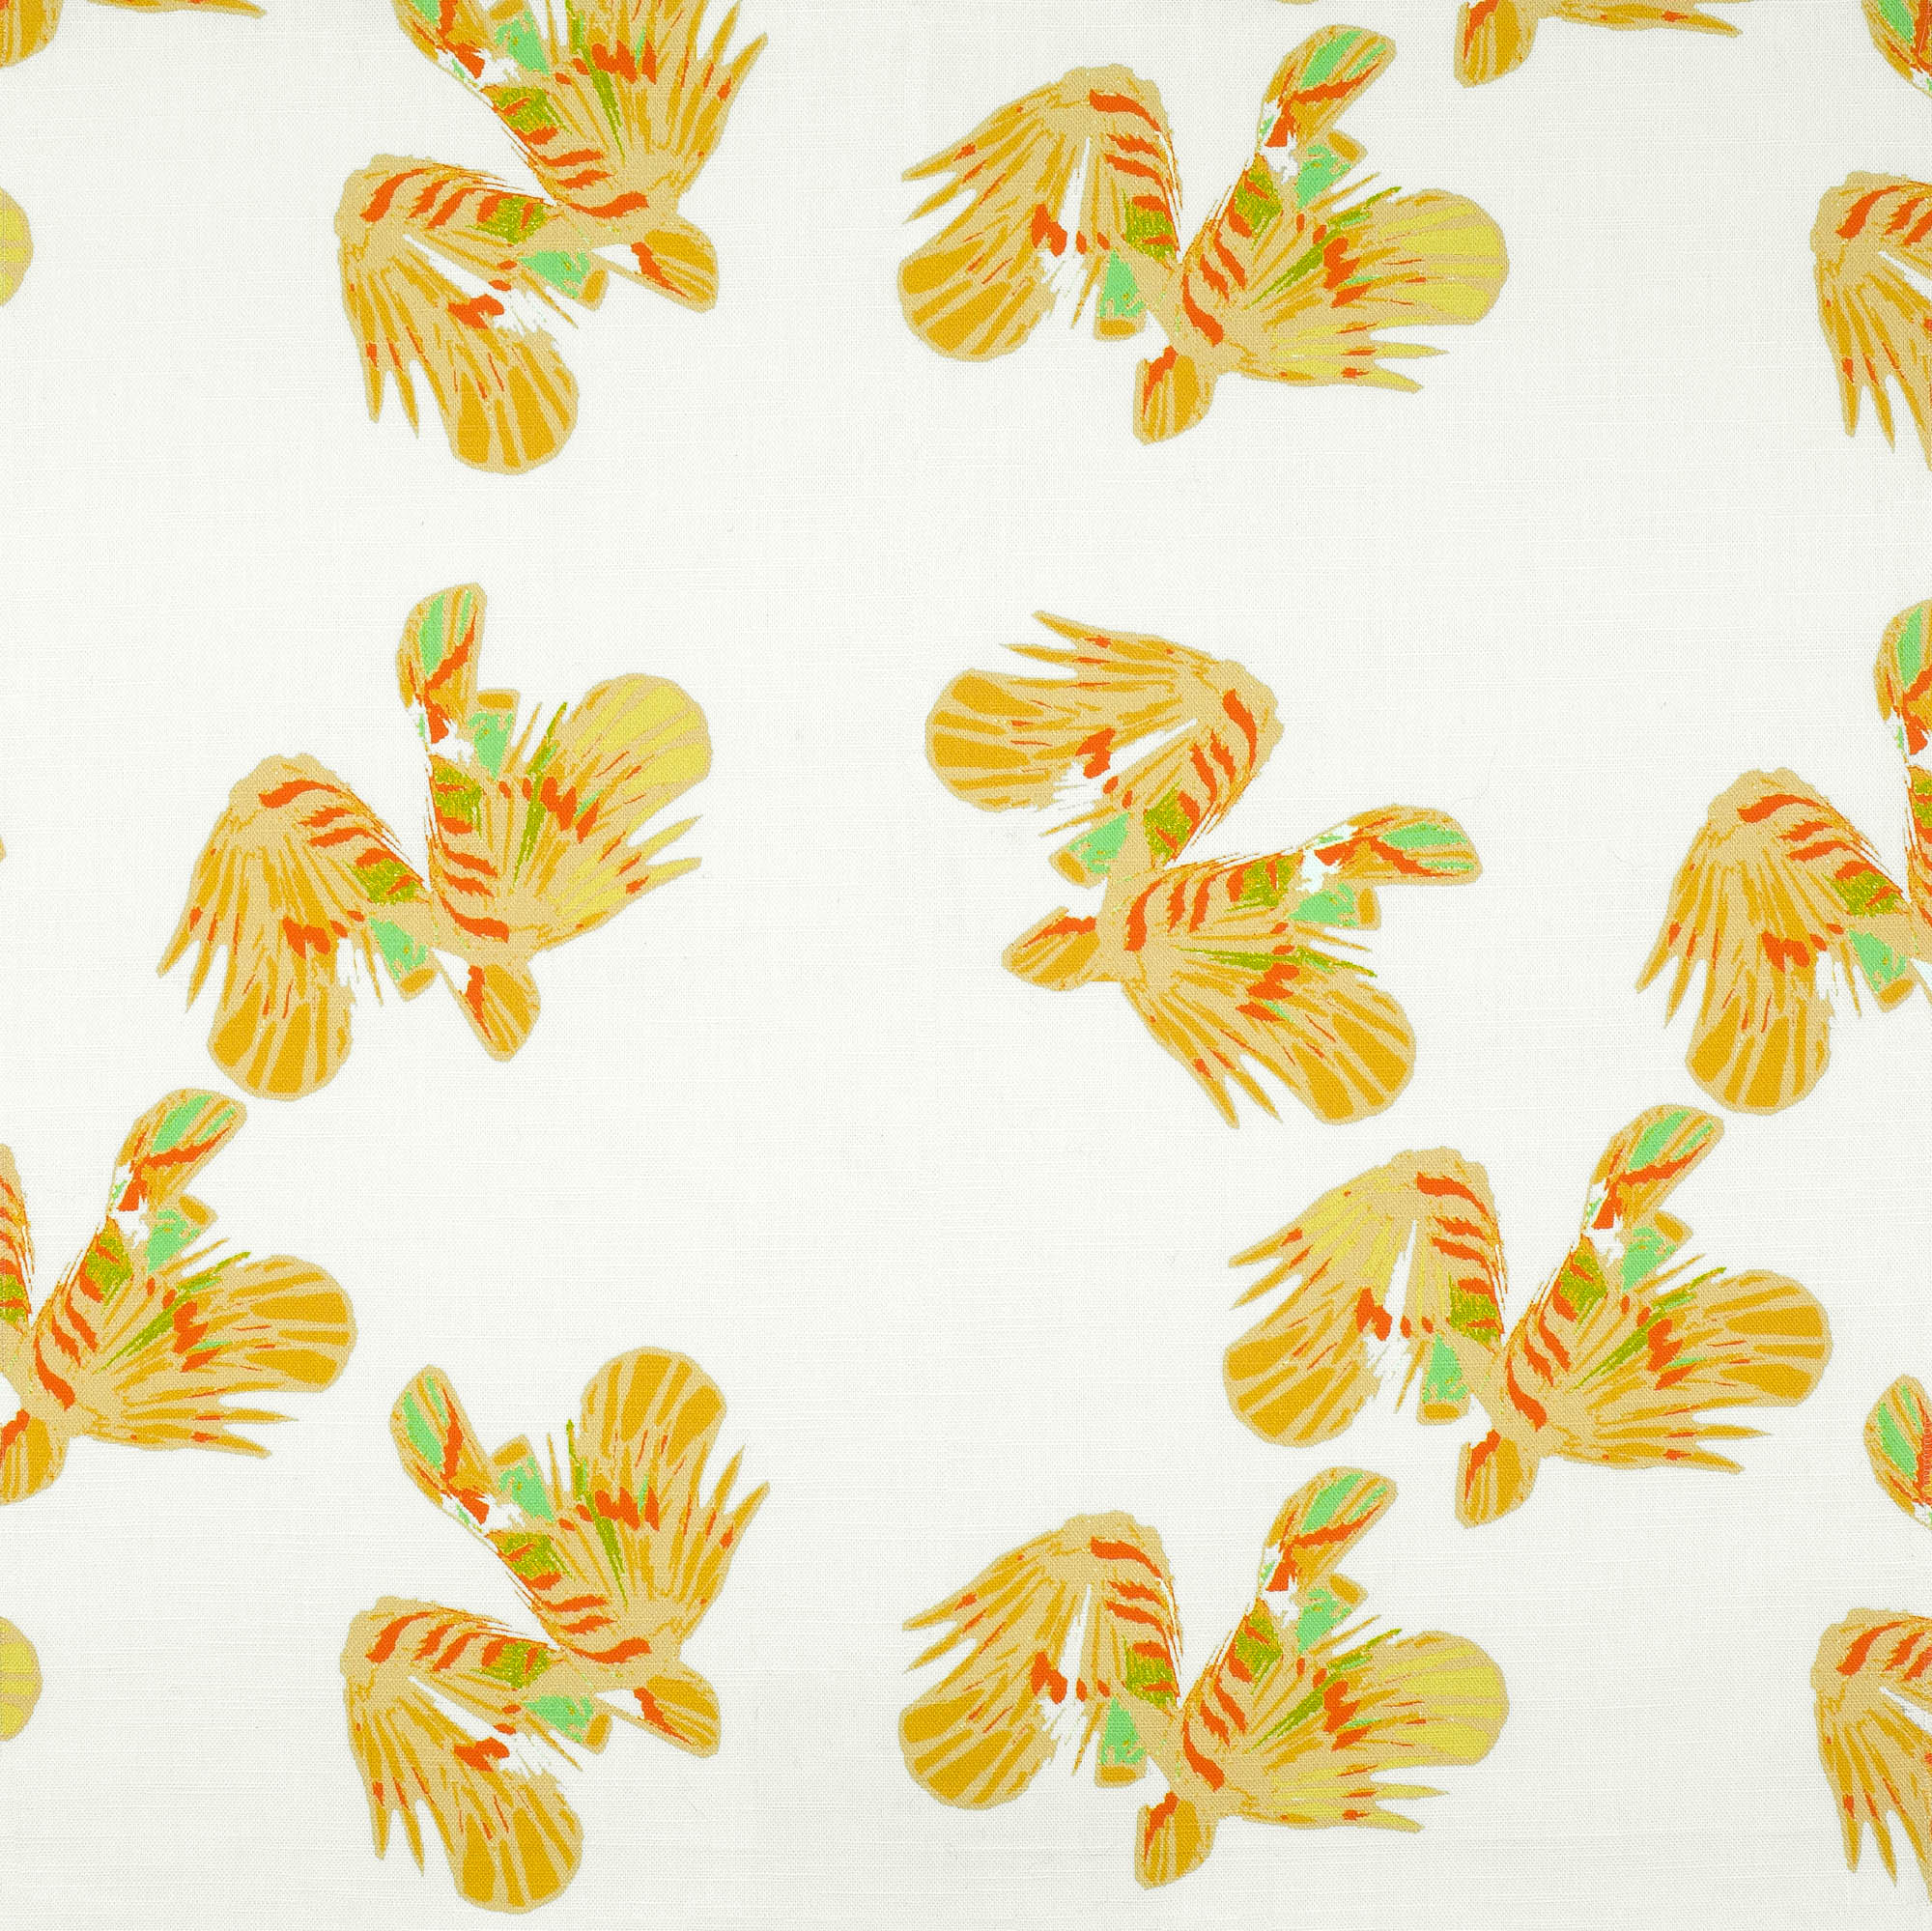 Detail of fabric in a playful feather print in yellow, orange and green on a cream field.